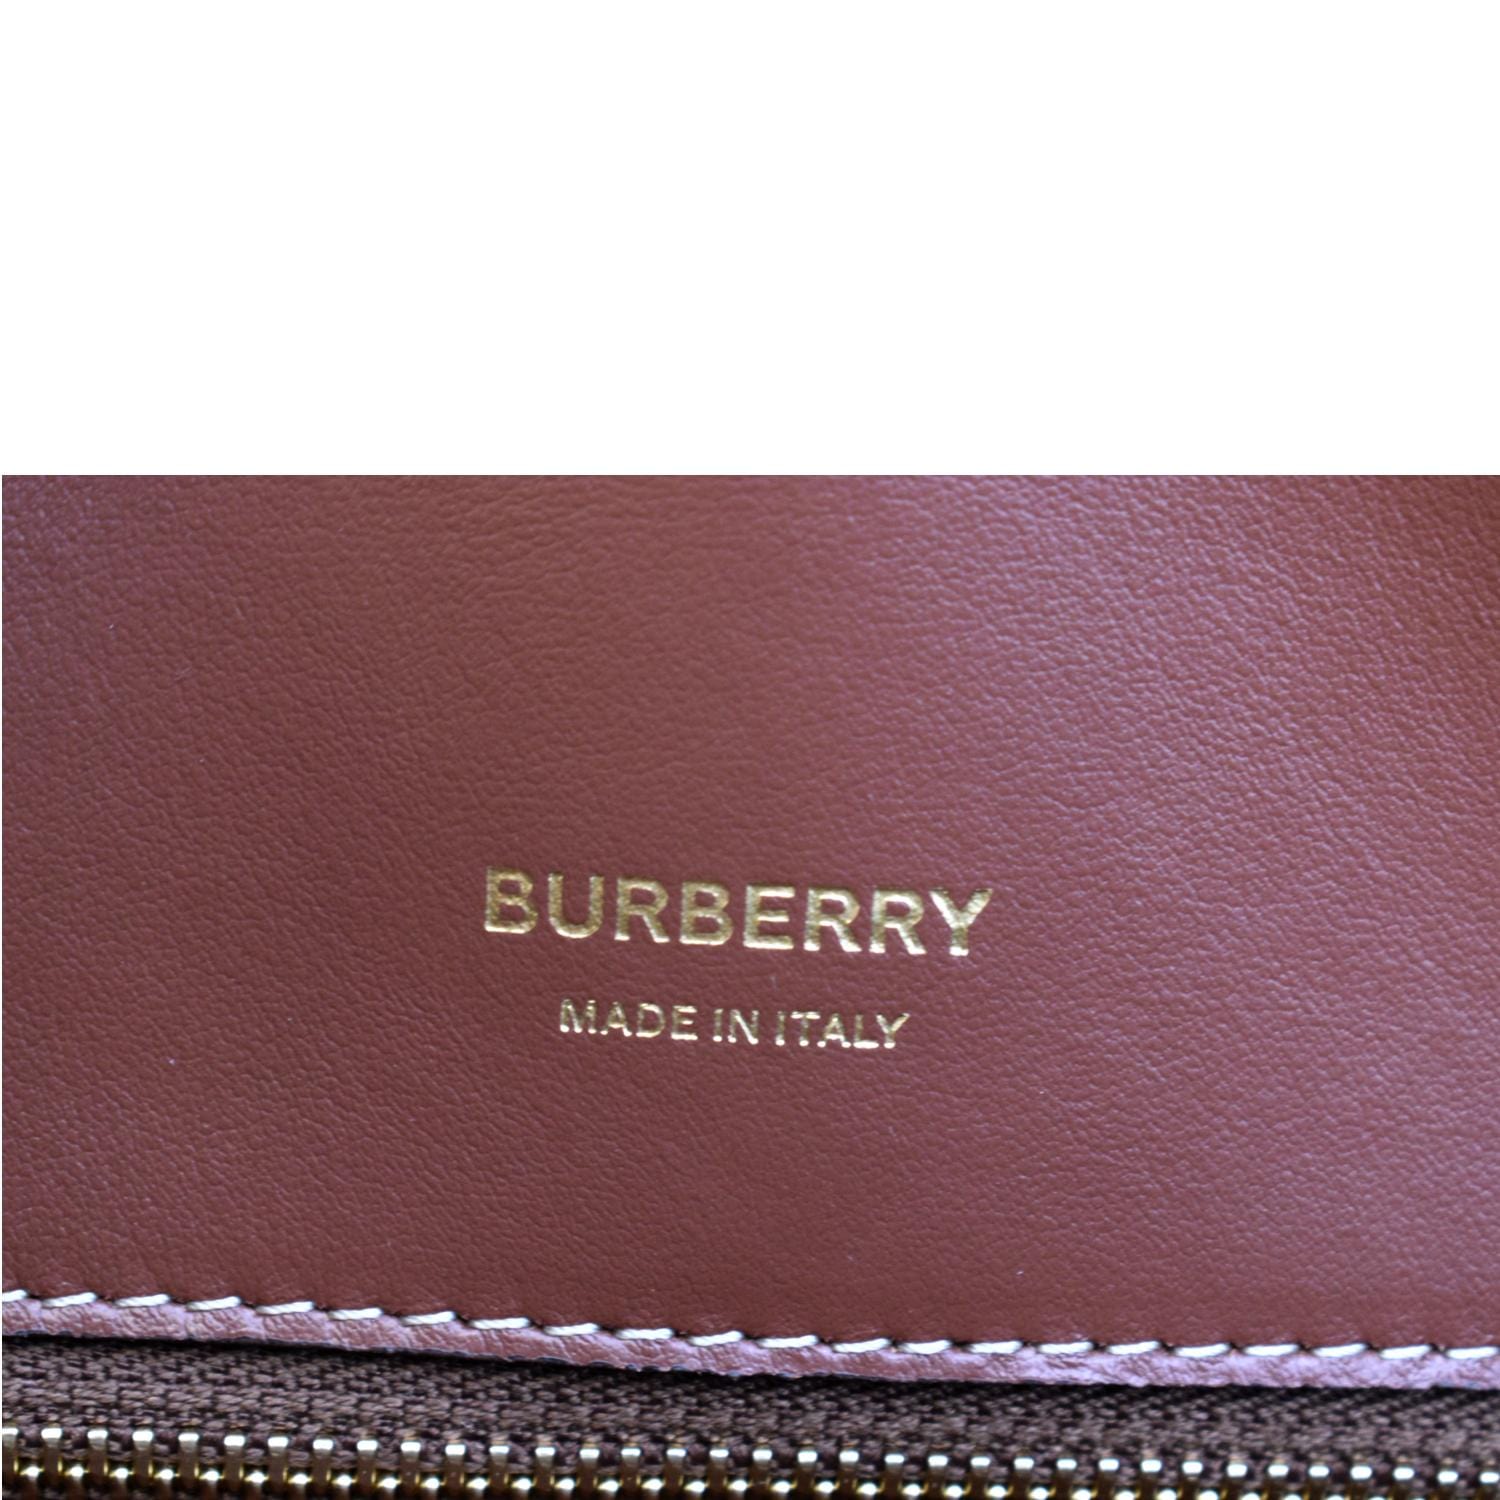 Celine Triomphe compact wallet + Burberry TB logo checkered bag Reviews! My  best deal of 2022! : r/DHgate